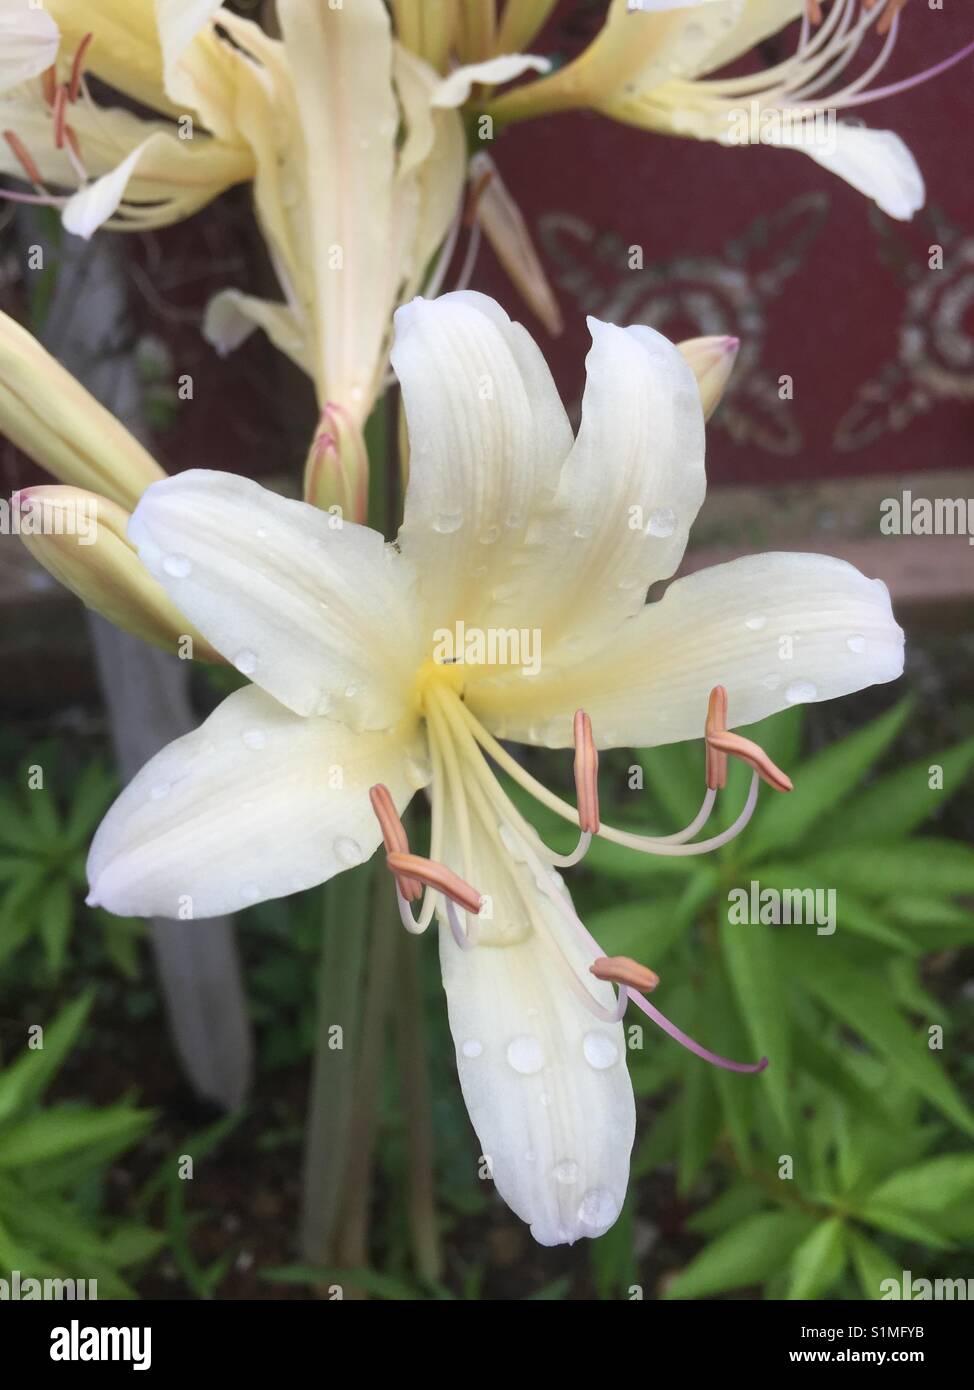 Lily blooming outsides Stock Photo